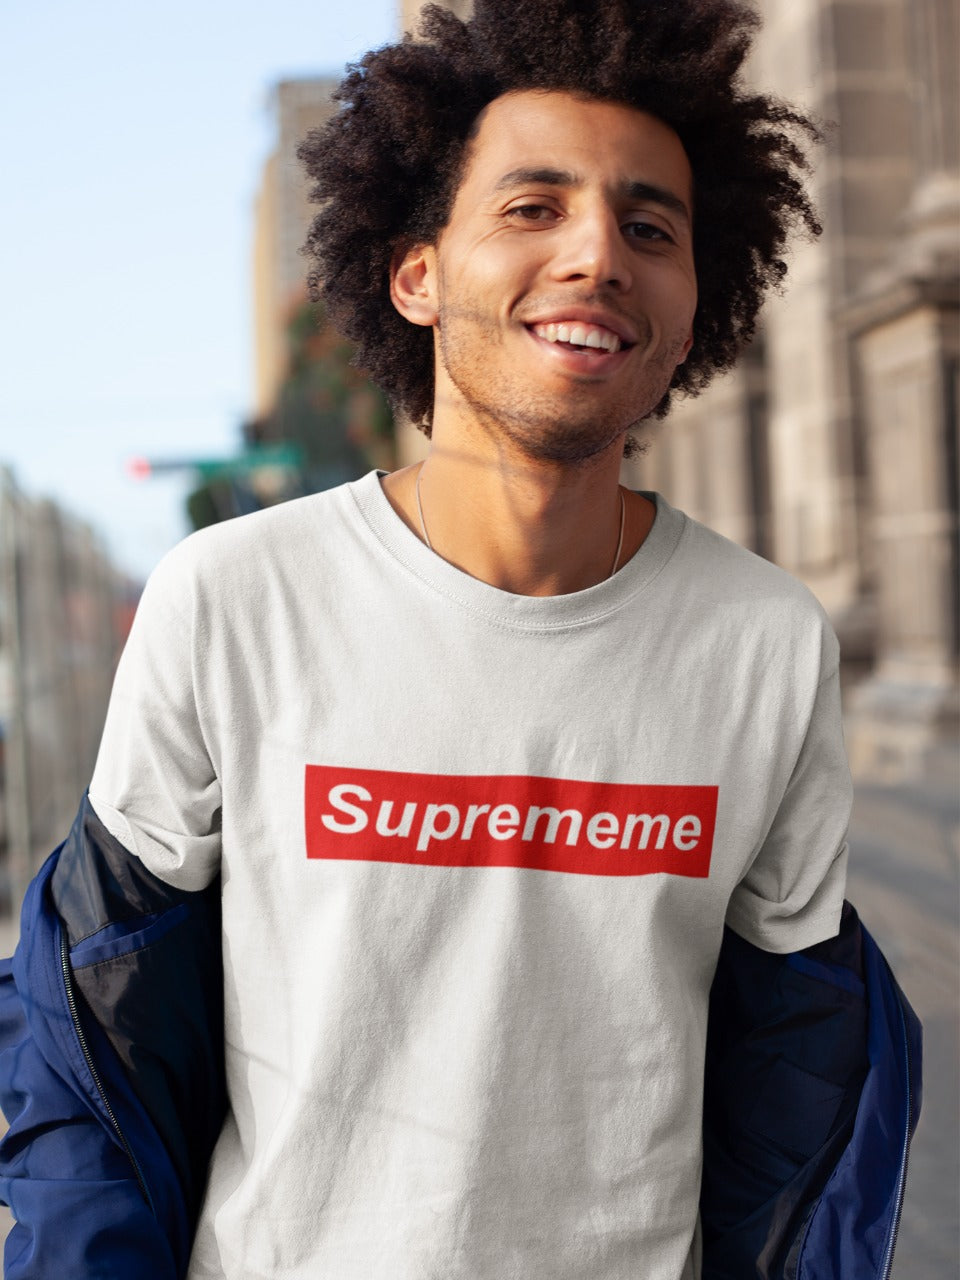 smiling man with curly hair wearing a white tshirt with suprememe printed on it in red colour